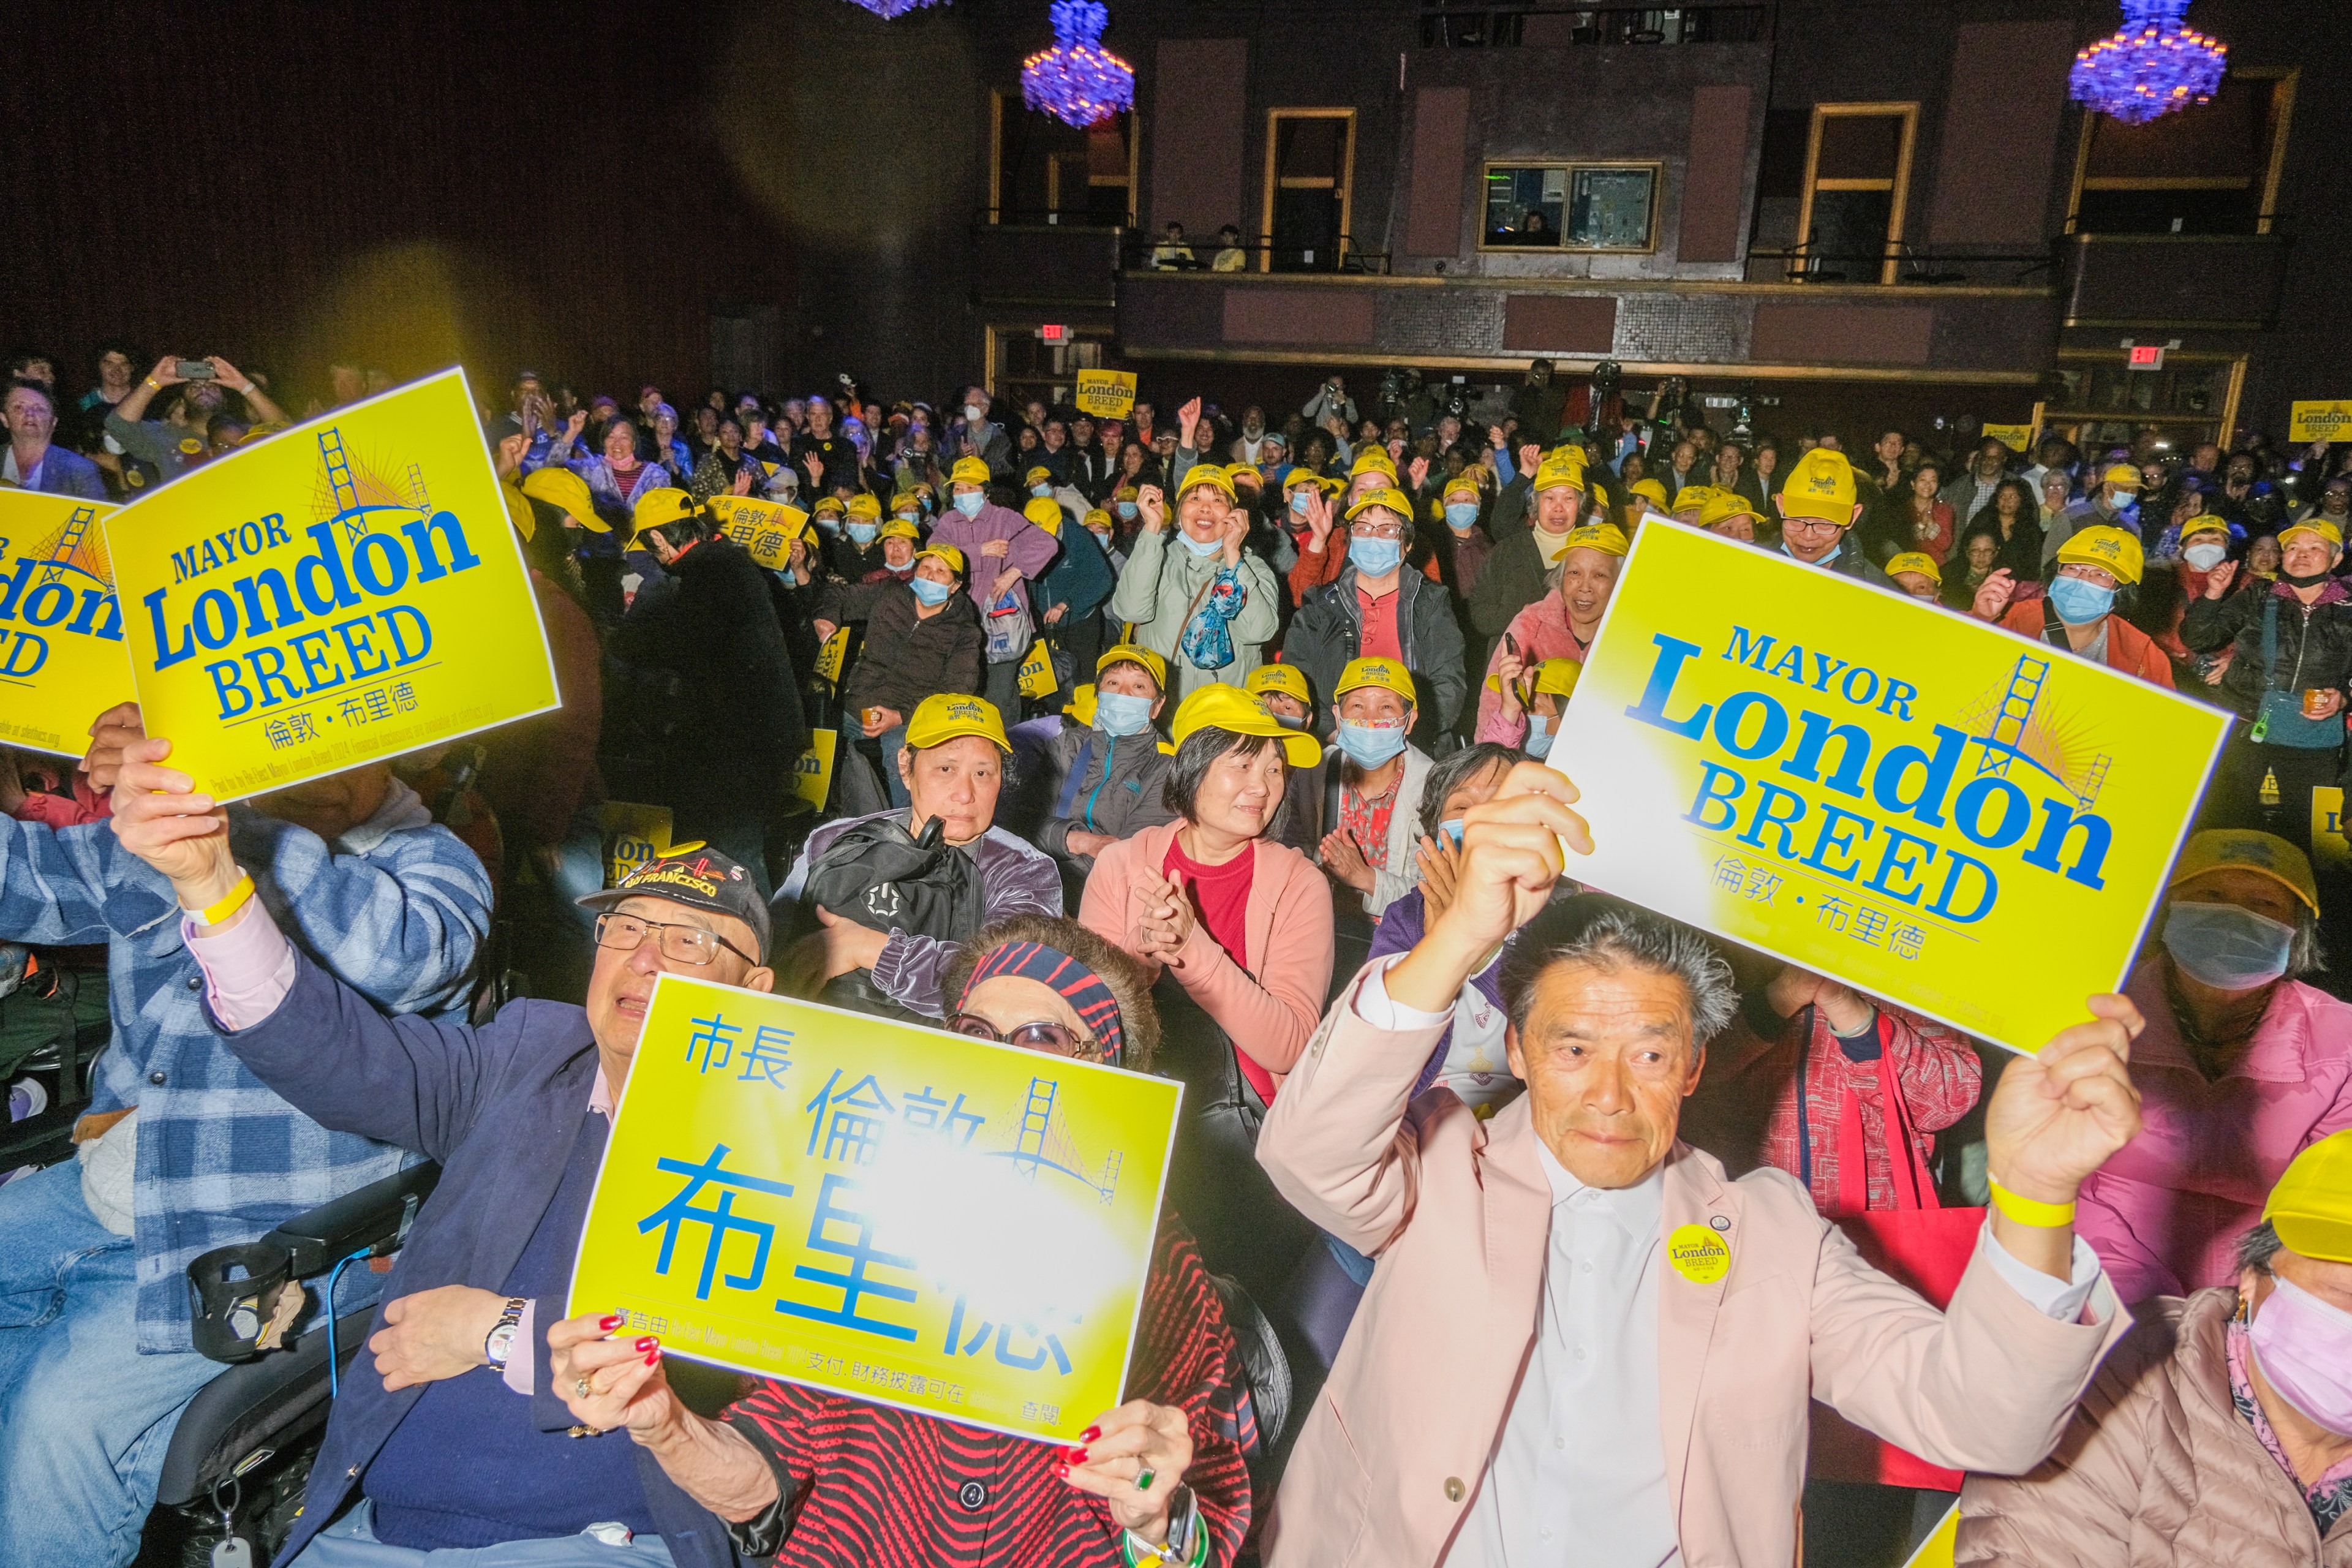 A crowd of joyful people, many wearing yellow hats, holds up signs supporting Mayor London Breed, in a well-lit indoor setting.